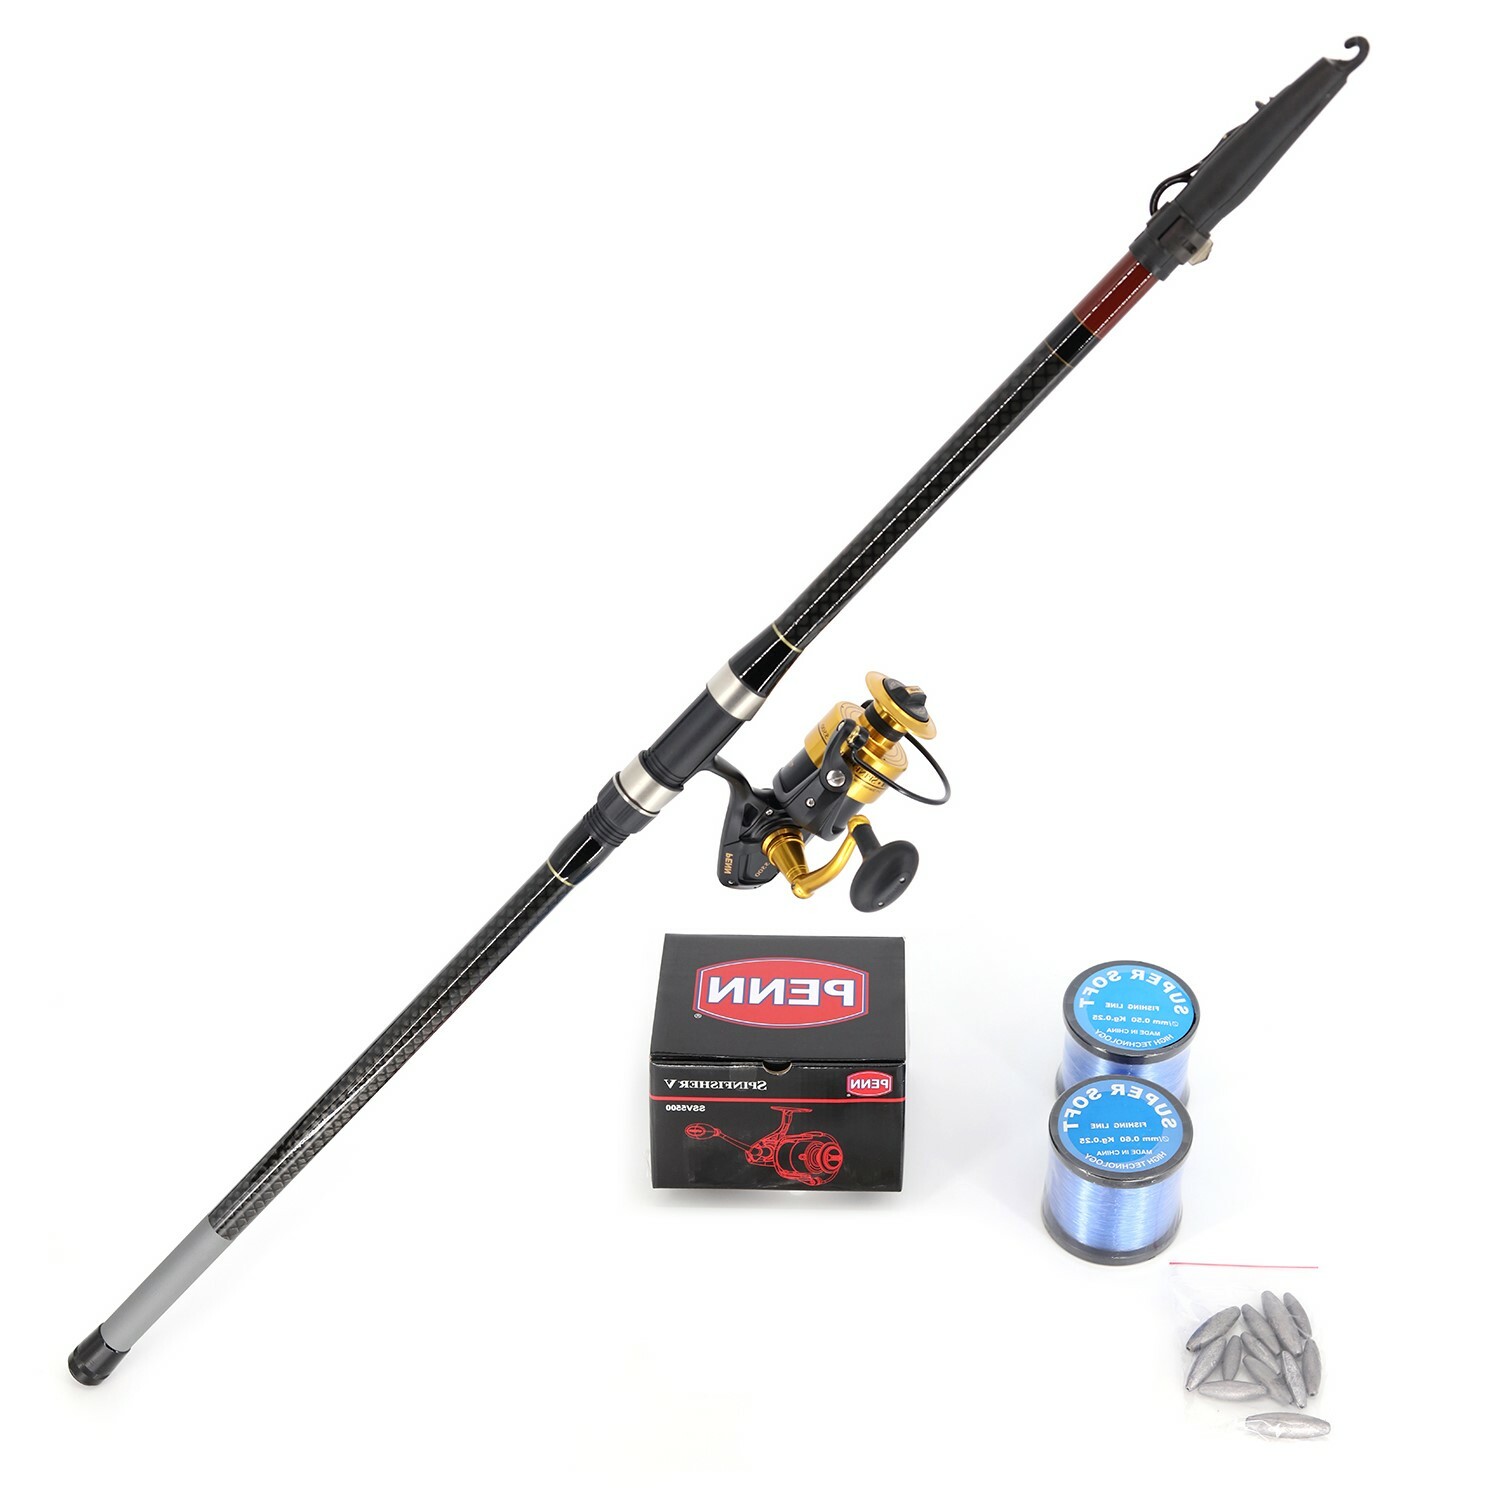 Shore Fishing (Pilot 4.2m and Penn V5500 including Nylon line with rigs and sinkers and snap swivels) Combo